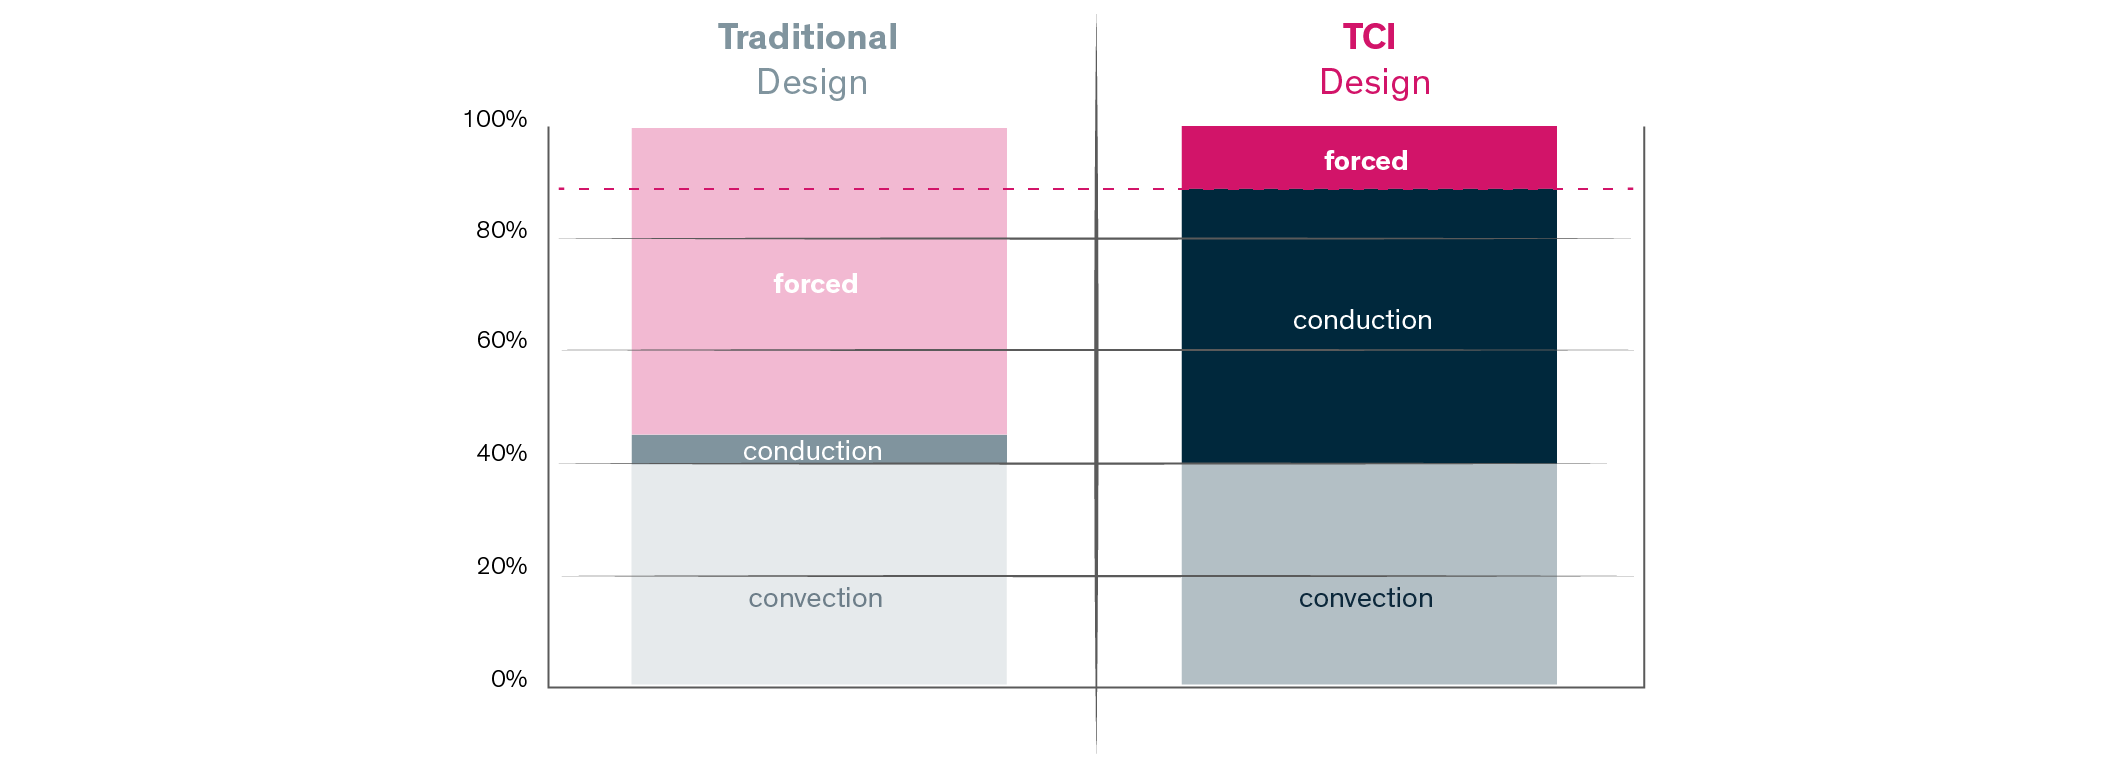 comparsion of traditional and TCI design